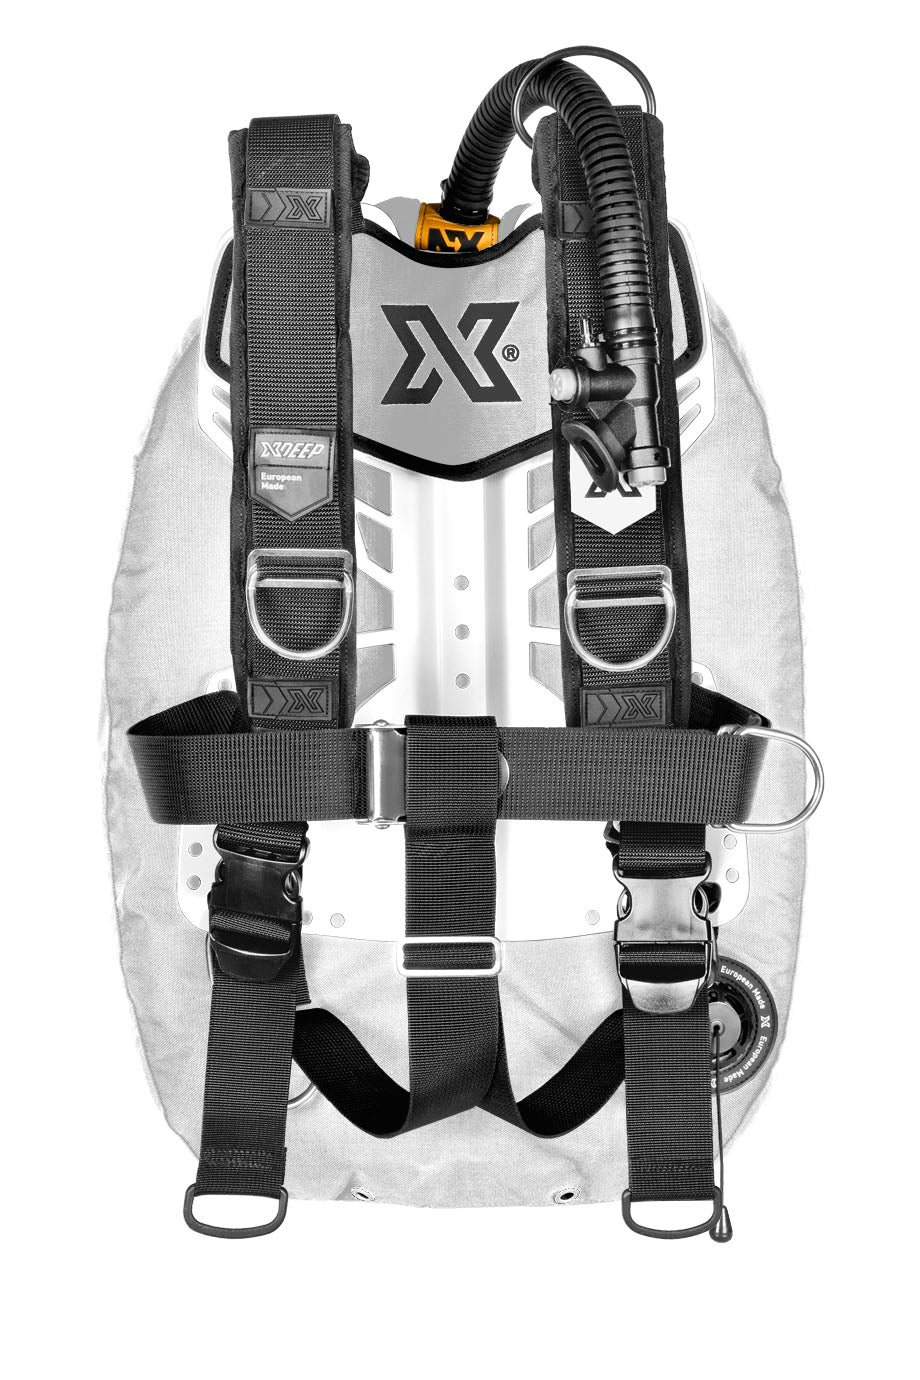 XDEEP XDEEP Zen Ultralight Wing System Deluxe / Small / White - Oyster Diving